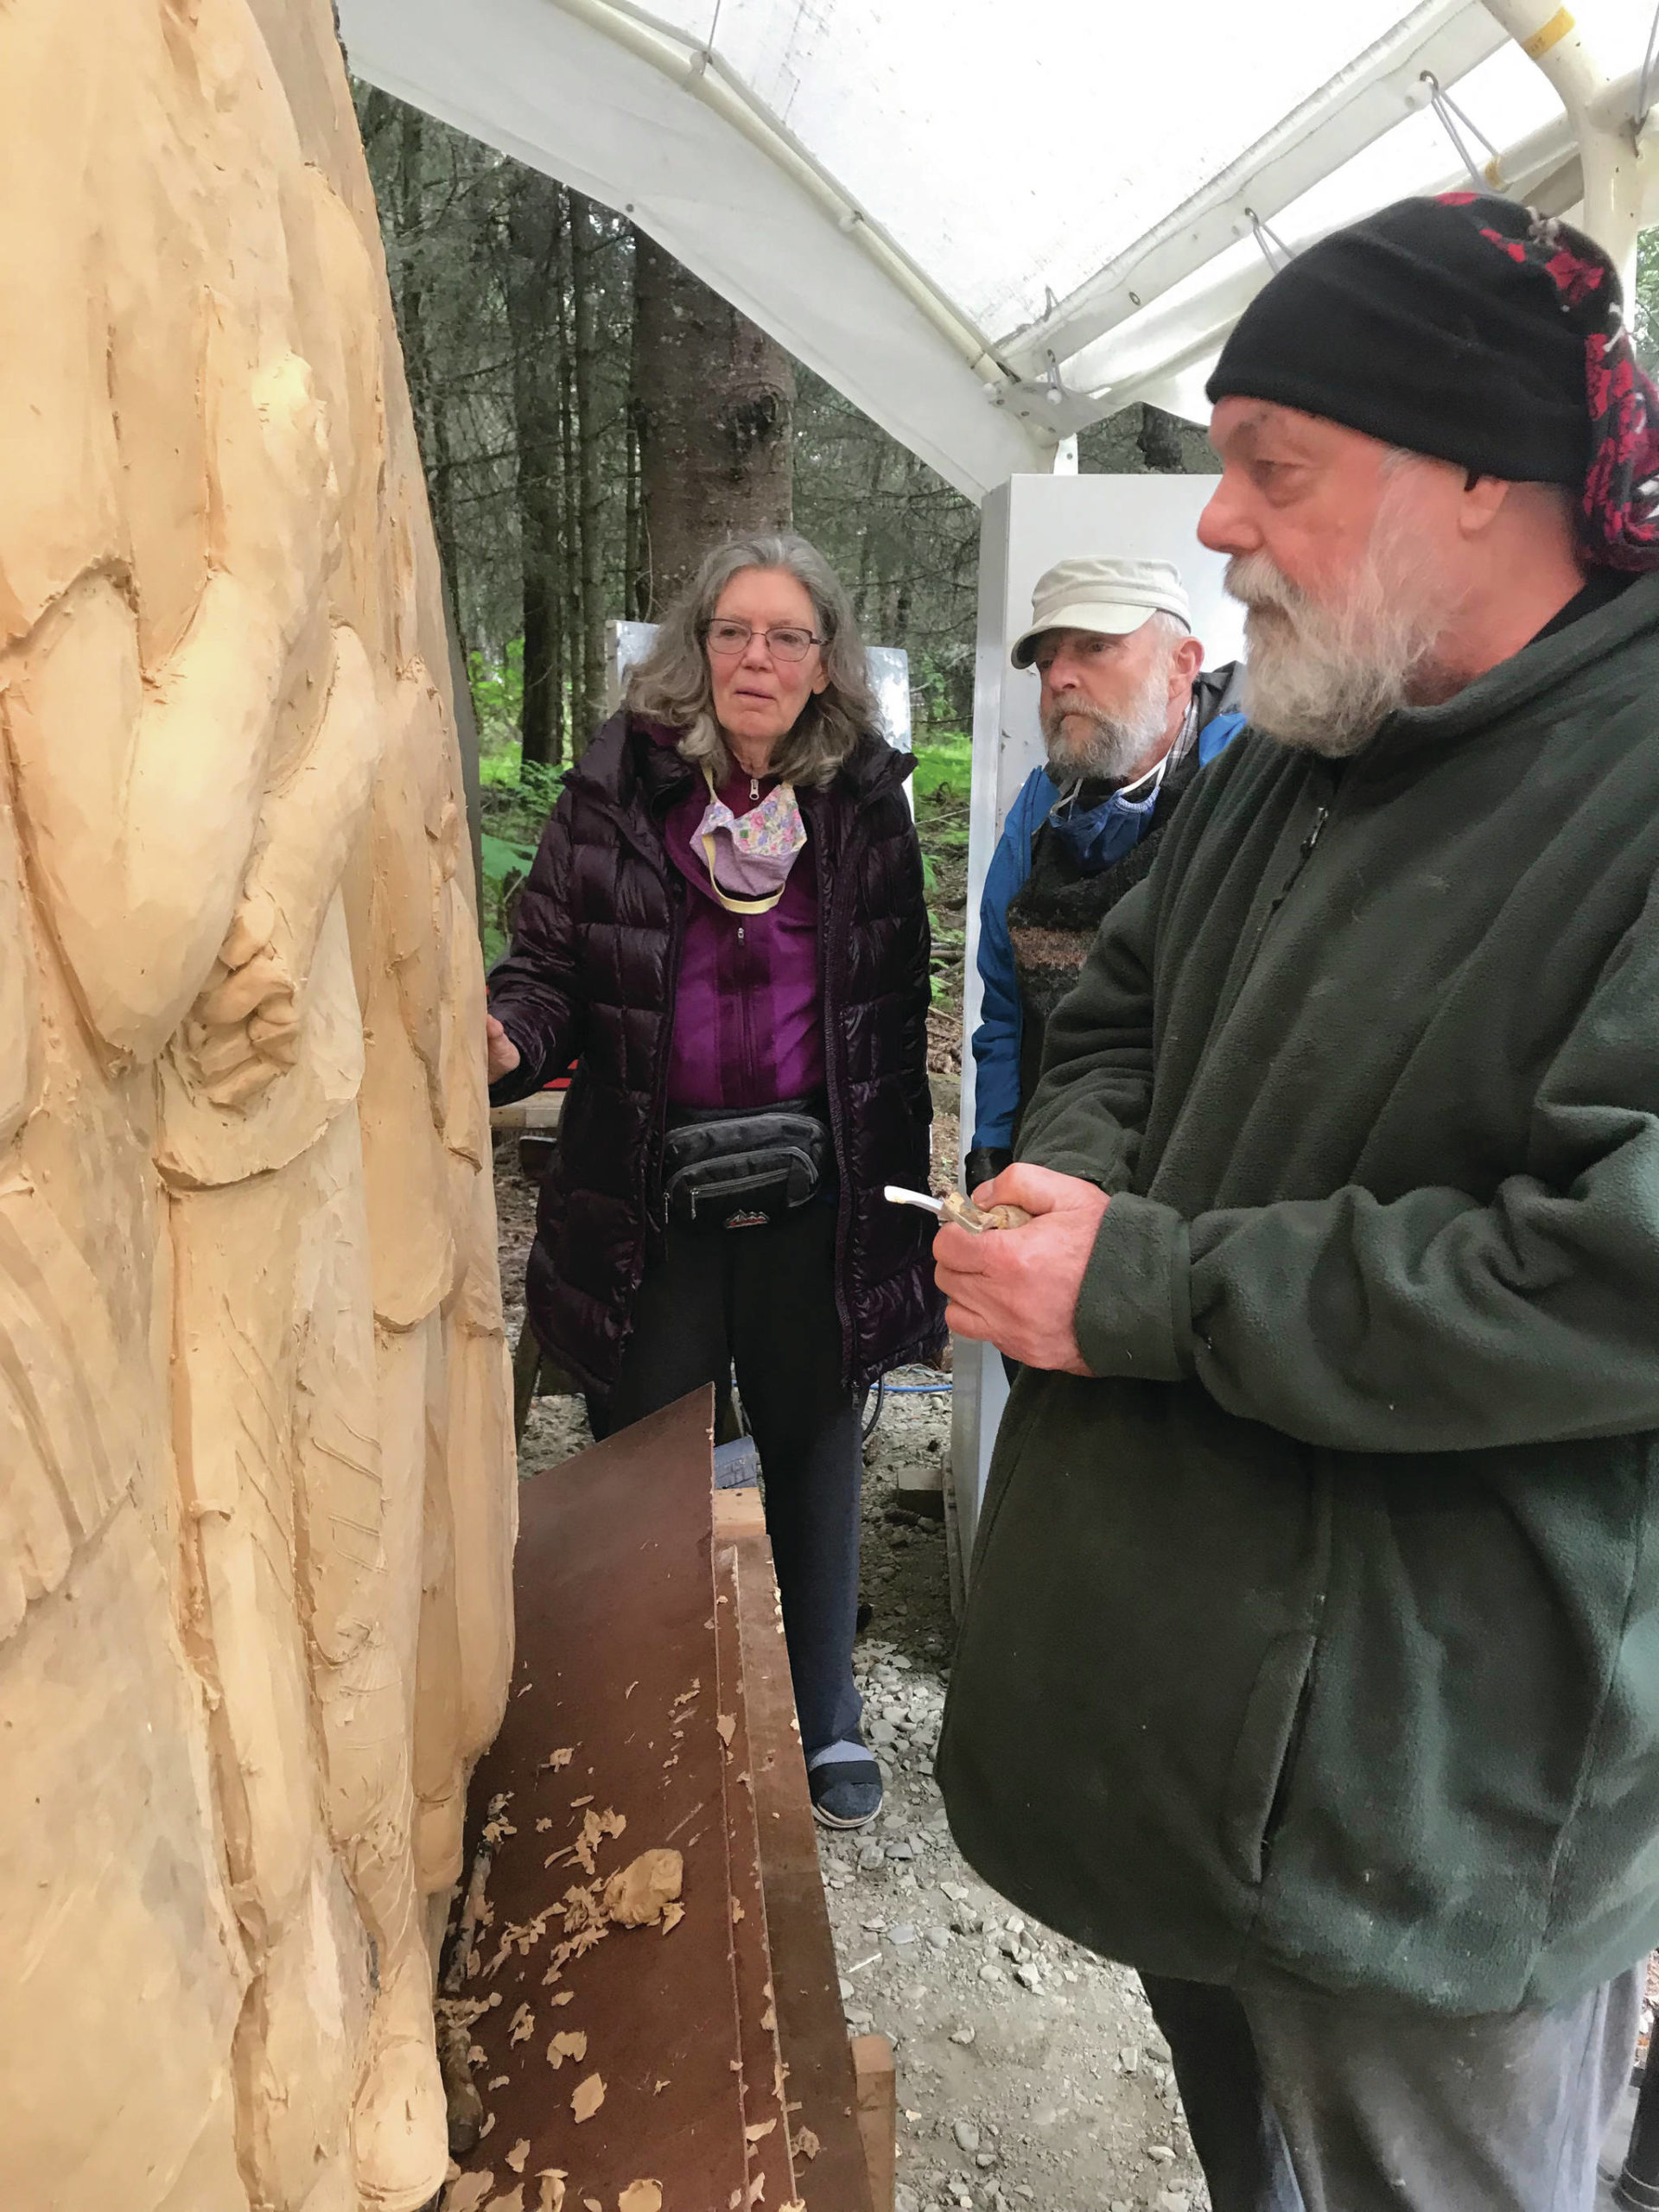 Sara Berg, left, and Ed Berg, center, talk with artist Brad Hughes, right at Hughes’ Homer, Alaska, studio in June 2021 about the Loved & Lost Memorial Bench project Berg and other family and friends of Anesha Murnane commissioned to honor Murnane and other missing woman and children. (Photo by Christina Whiting)